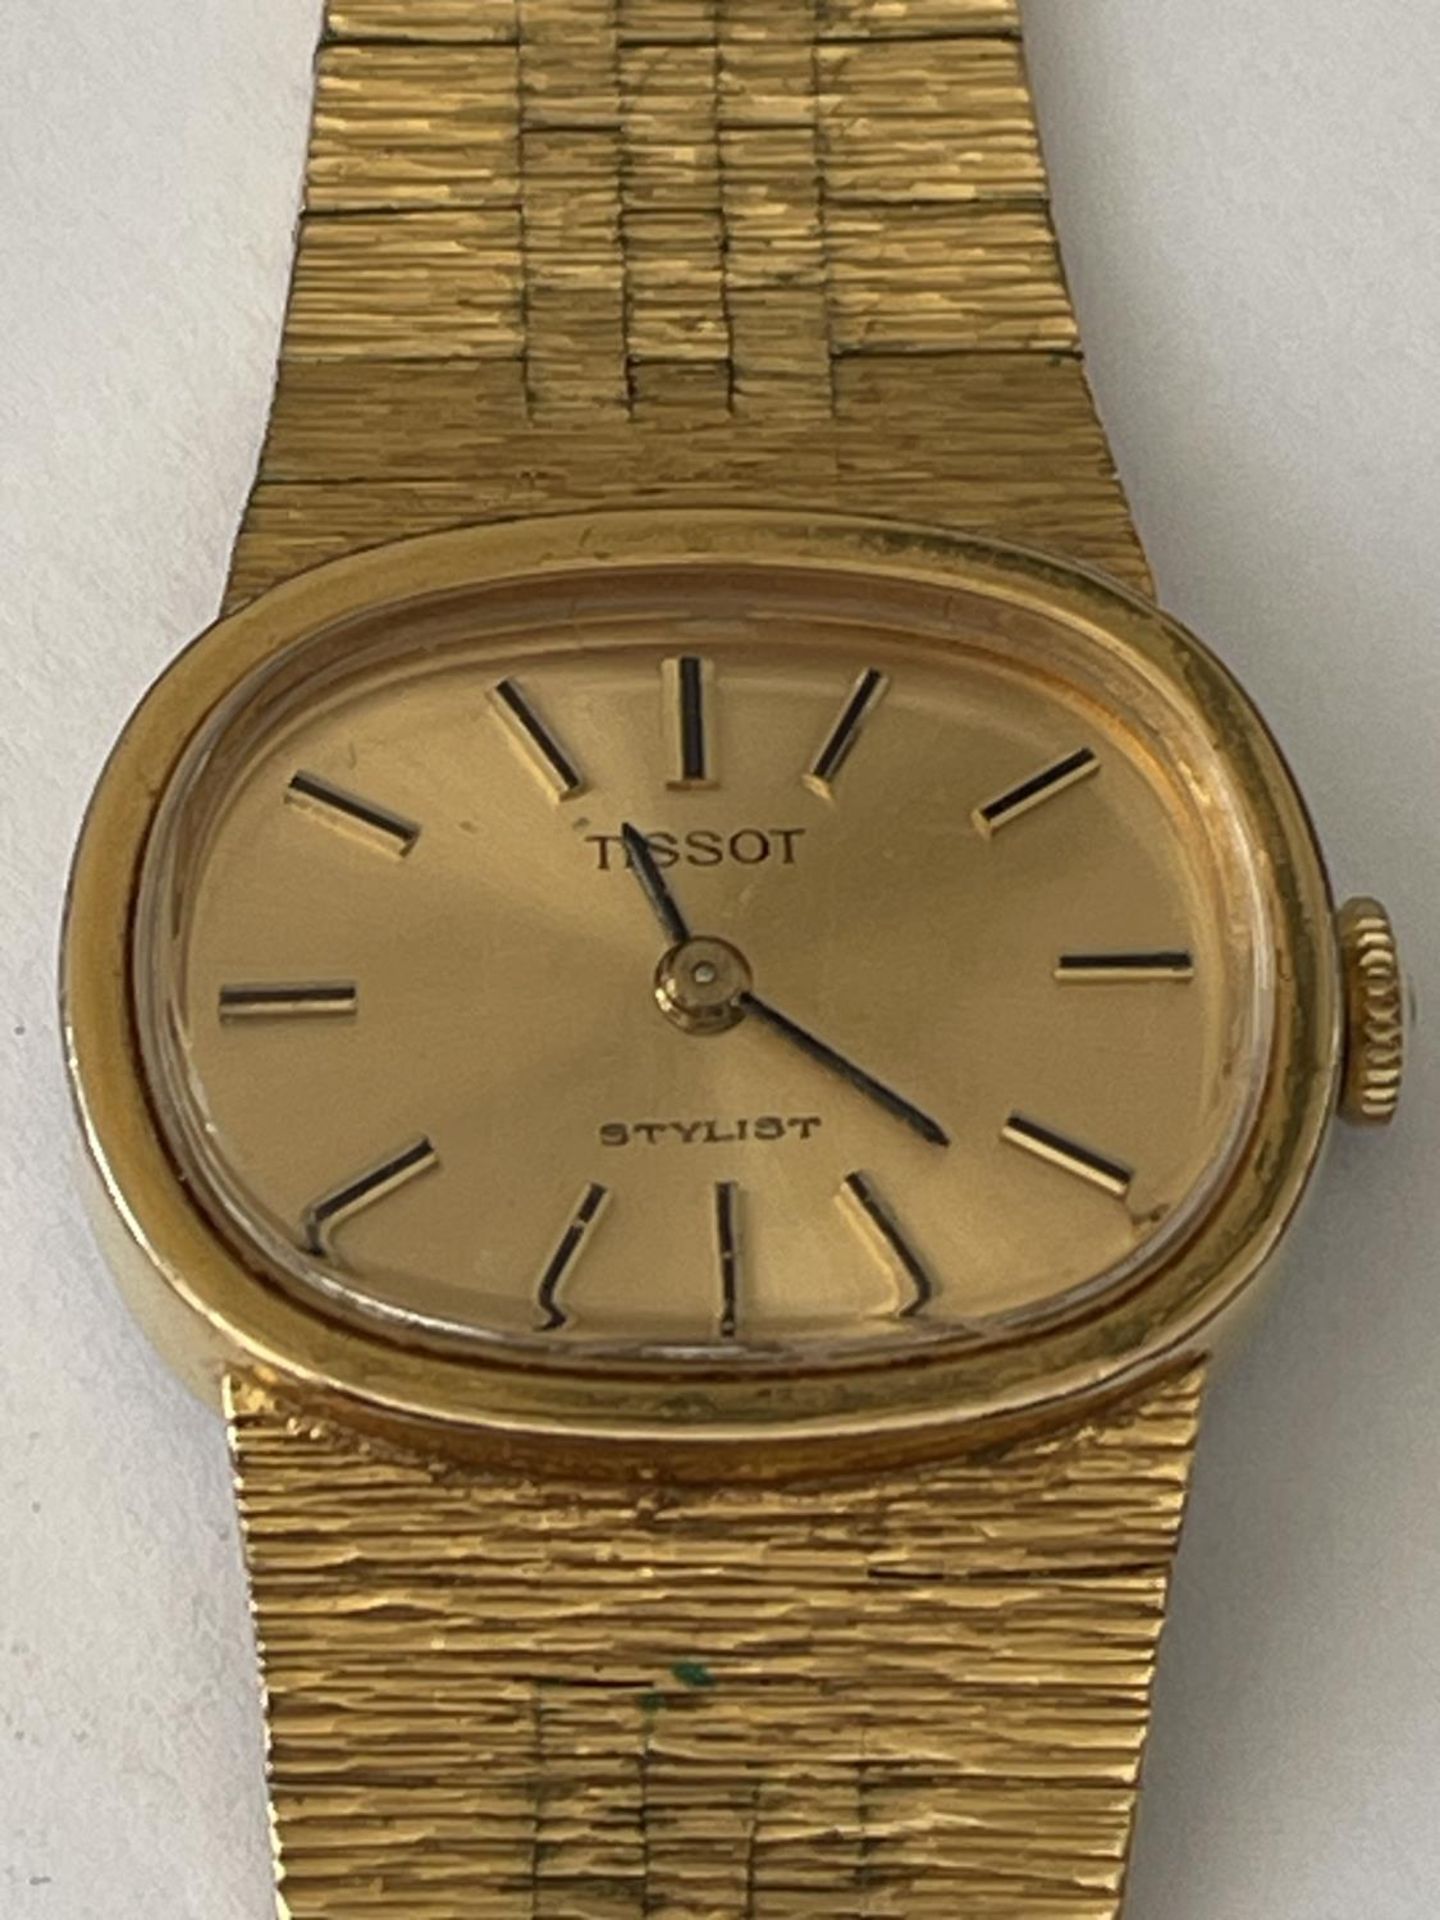 A TISSOT WRISTWATCH WITH YELLOW METAL STRAP SEEN WORKING BUT NO WARRANTY - Image 2 of 3